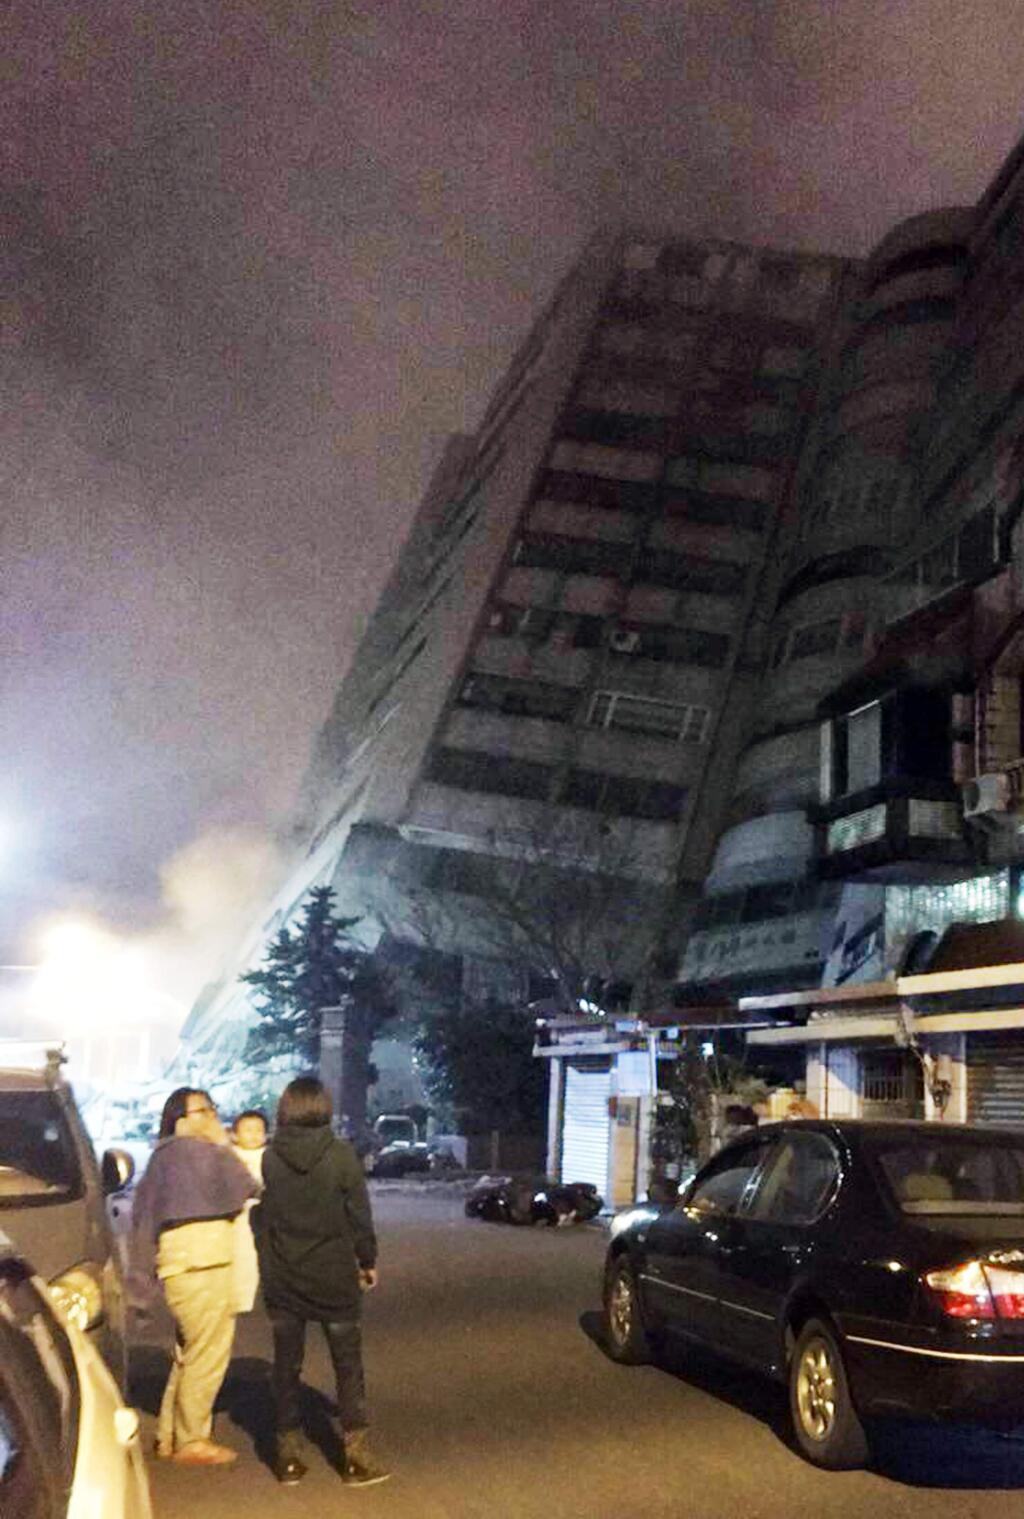 In this photo released by Hualien County Fire Bureau, Taiwanese people watching a building that collapsed on its side from an early morning earthquake in Hualien County, eastern Taiwan, early Wednesday, Feb. 7 2018. A 6.4-magnitude earthquake has struck eastern Taiwan, according to the U.S. Geological Survey. (Hualien County Fire Bureau via AP)